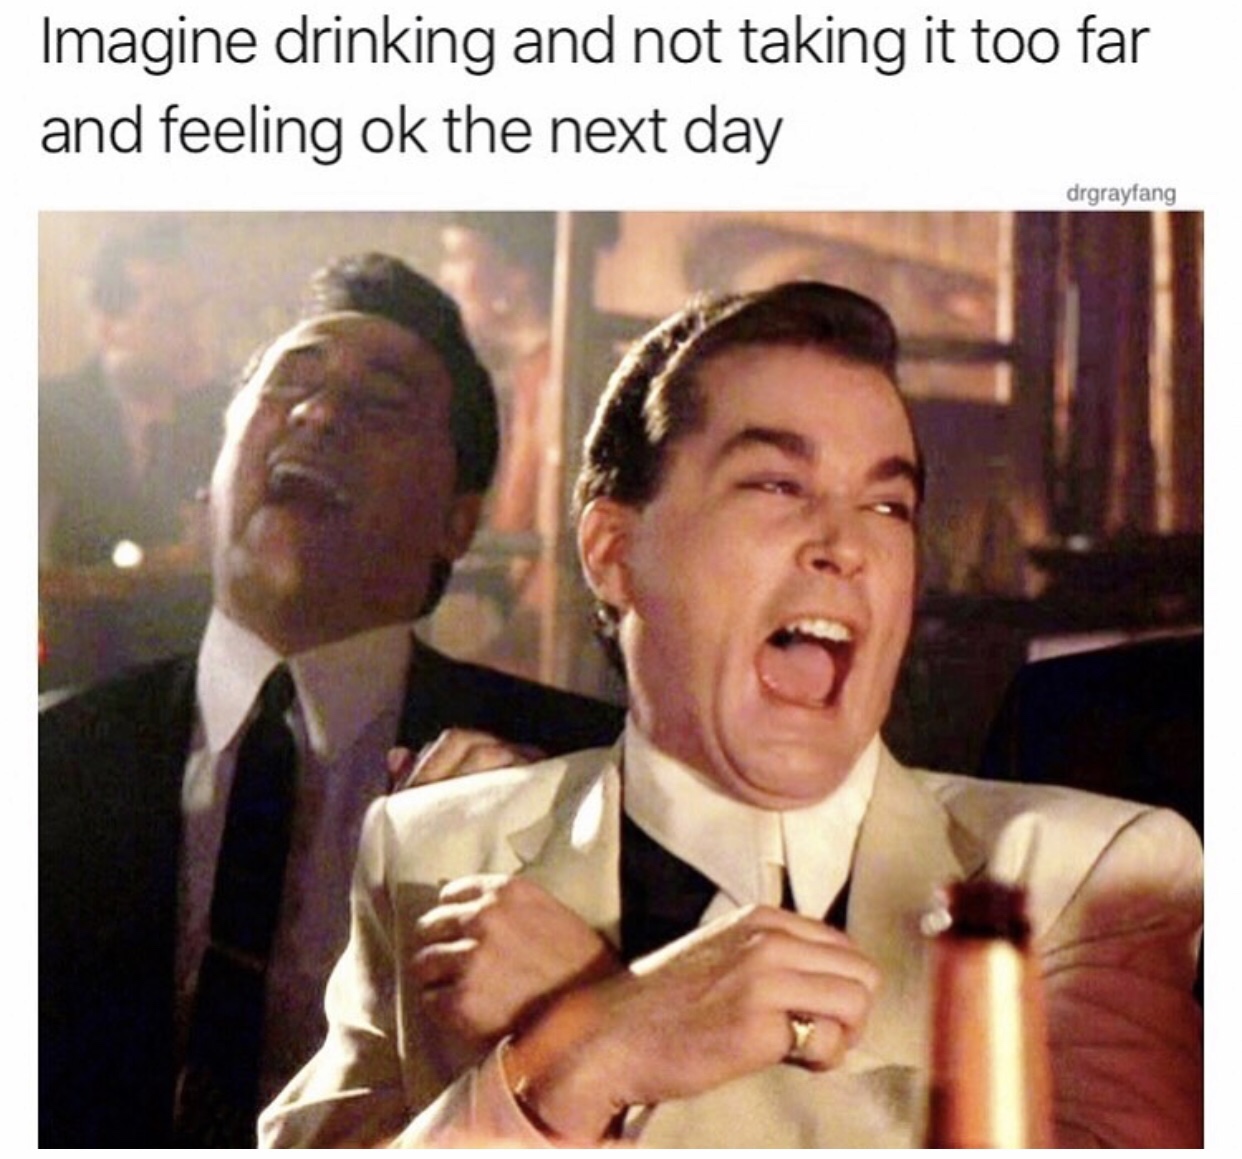 android charger meme - Imagine drinking and not taking it too far and feeling ok the next day drgrayfang